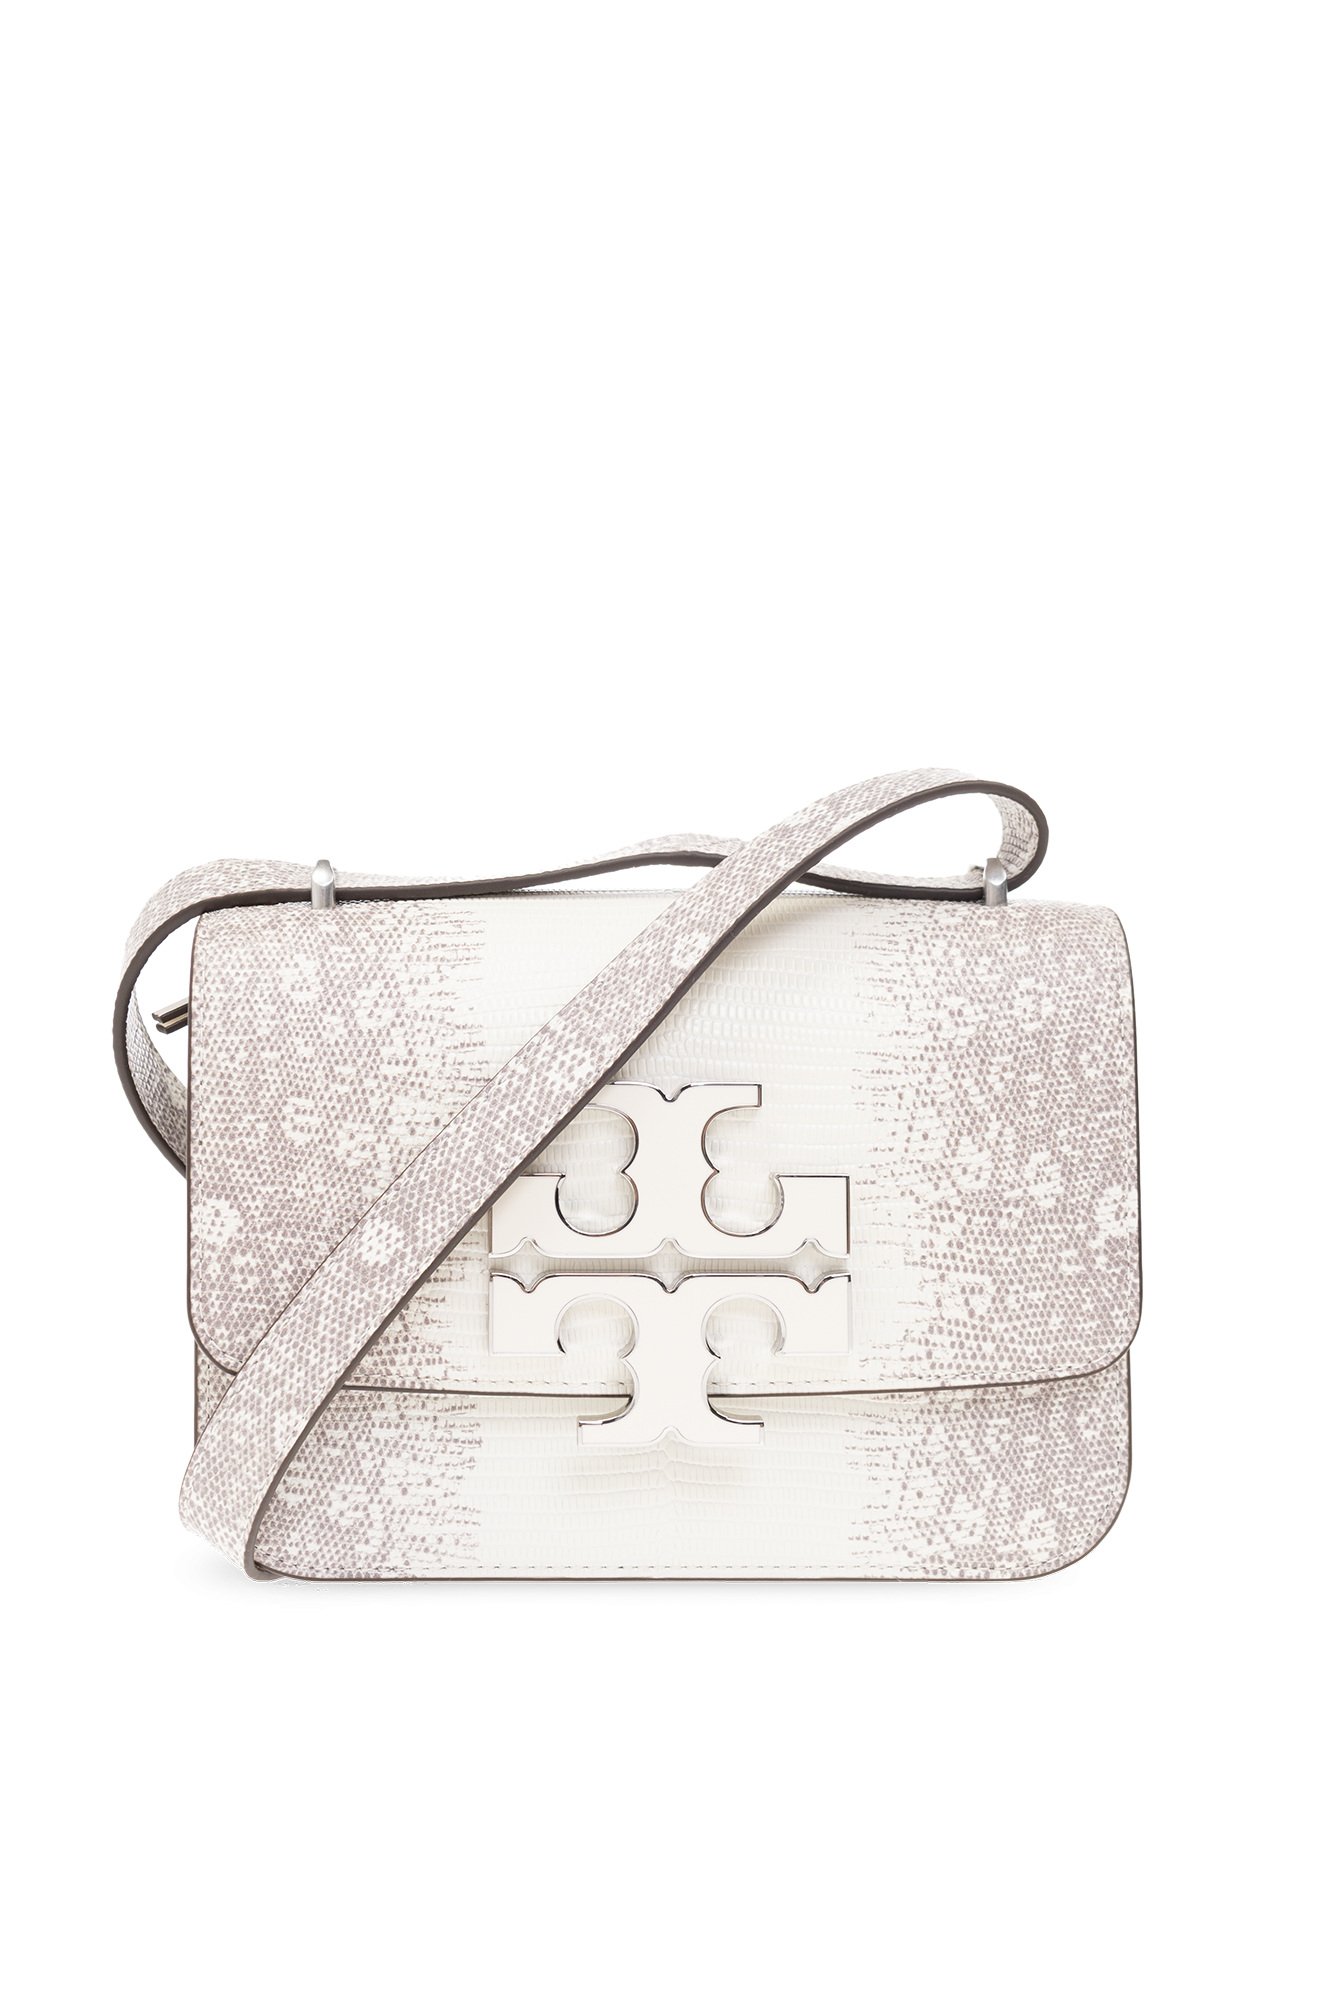 Tory Burch- Eleanor Small Leather Shoulder Bag- Woman- Uni - White